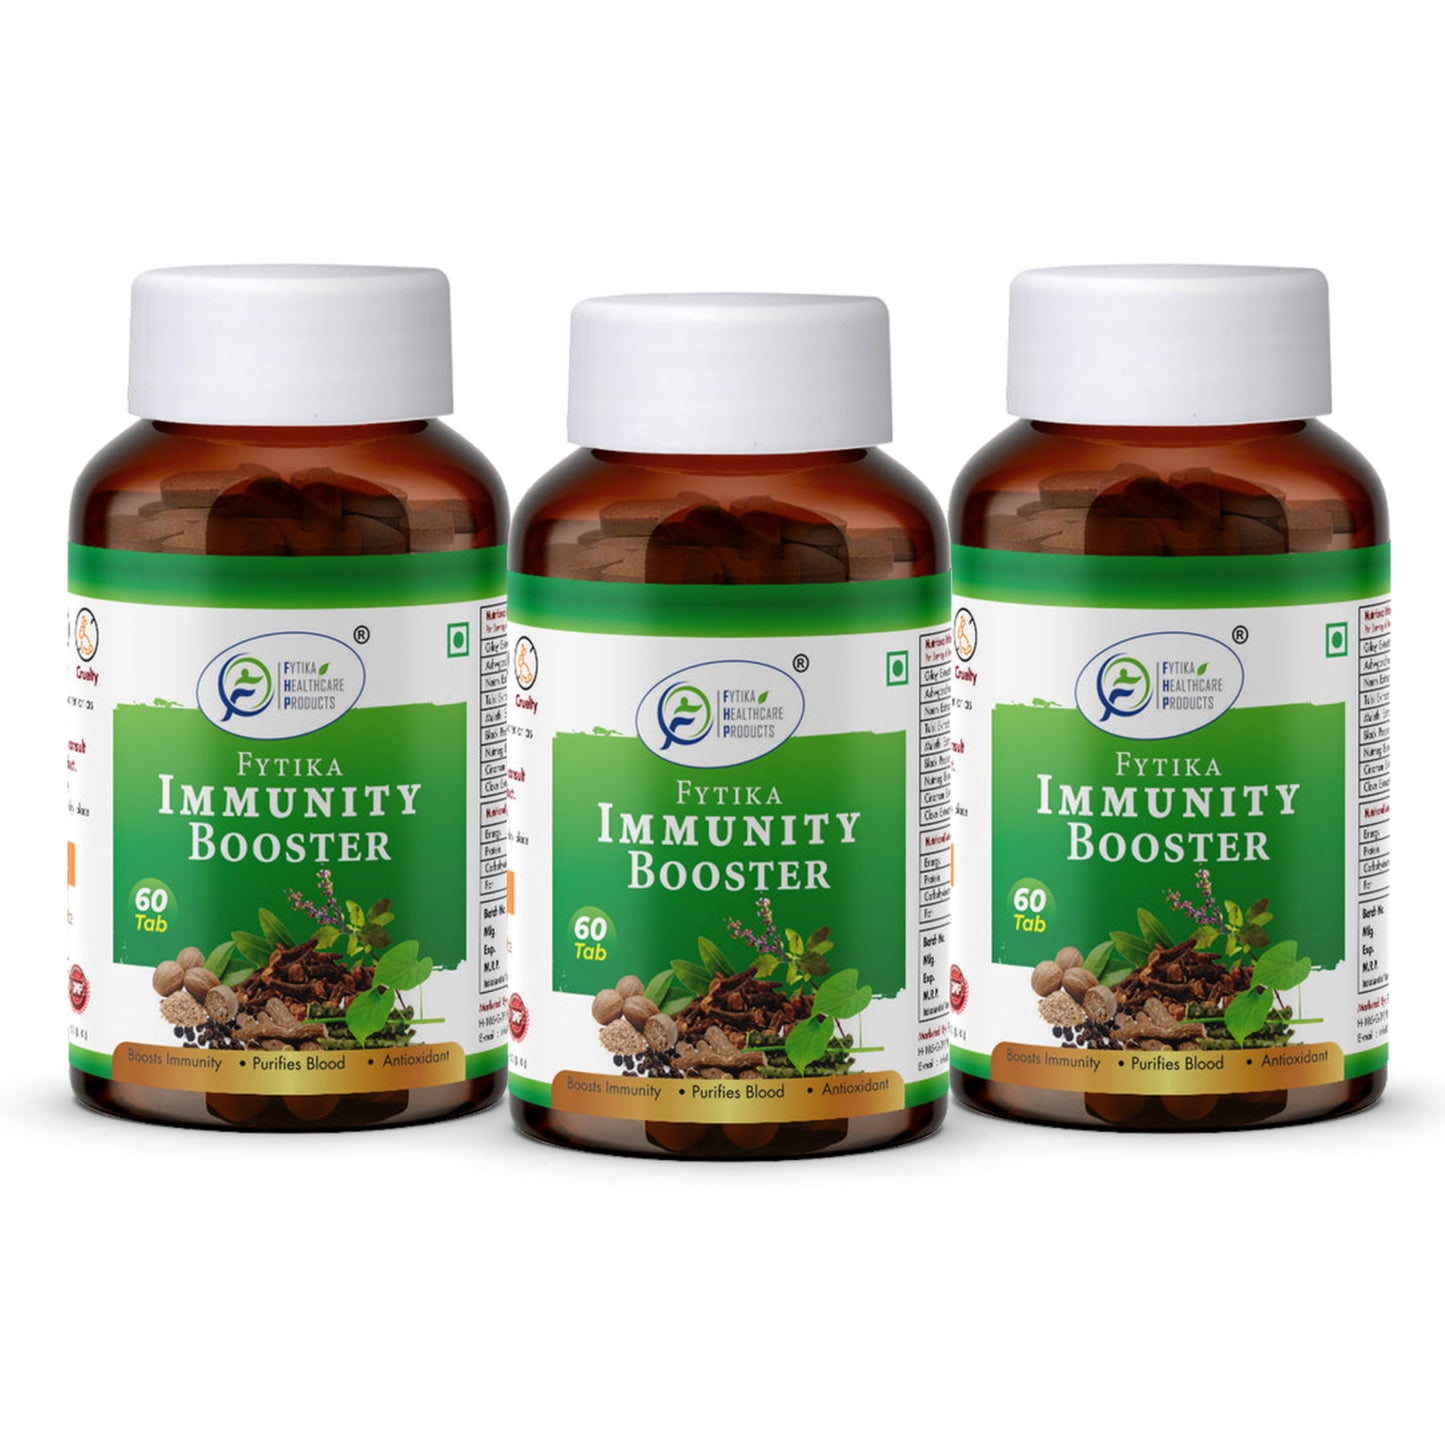 Fytika Immunity Booster Tablets for Adults -  Support Immune System, Formulated with Giloy, Ashwagandha, Tulsi, Neem and More -  60 Tablets